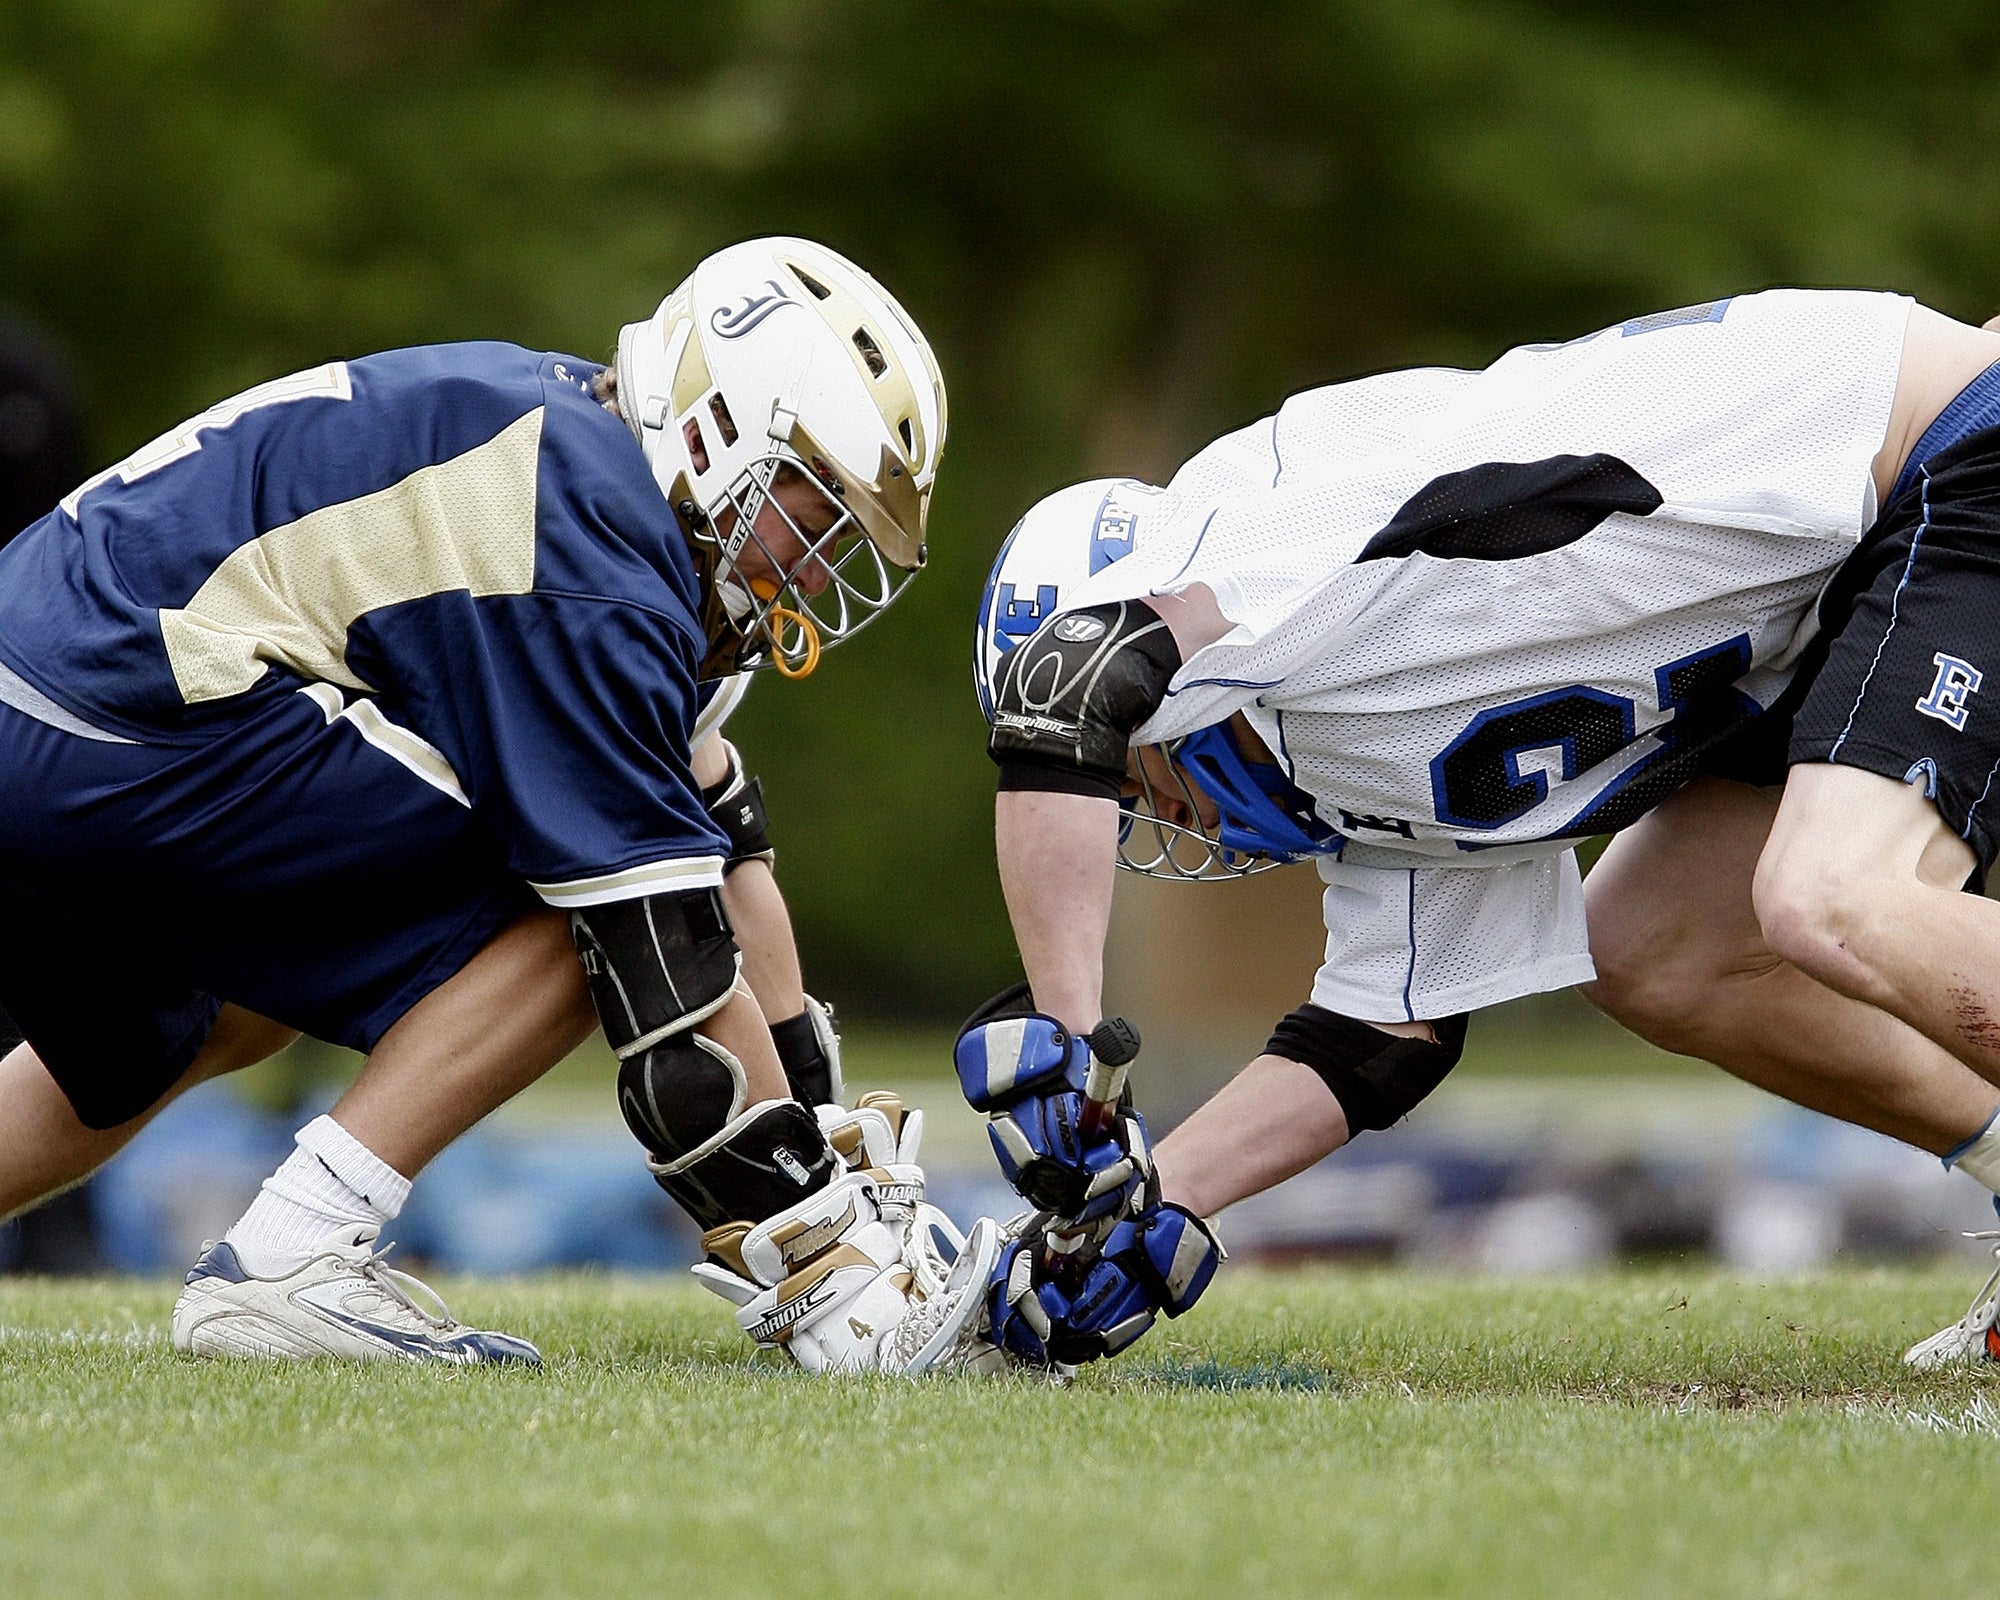 lacrosse players facing off